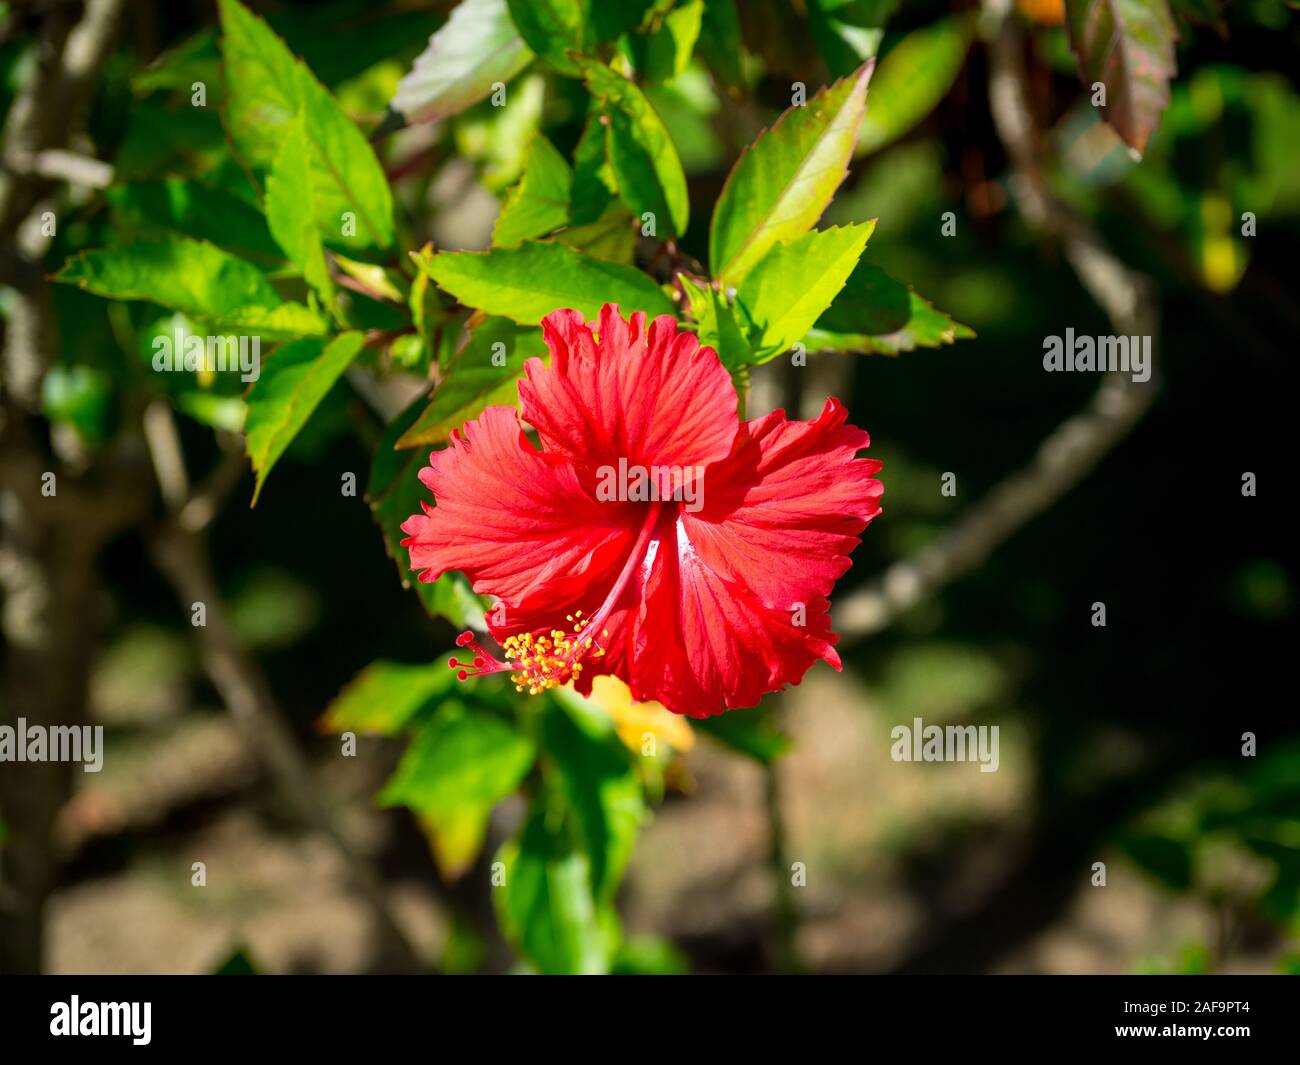 Red Chinese hibiscus (Hibiscus rosa-sinensis), also known as a China rose, Hawaiian hibiscus, rose mallow or shoeblackplant. Ishigaki, Okinawa, Japan Stock Photo